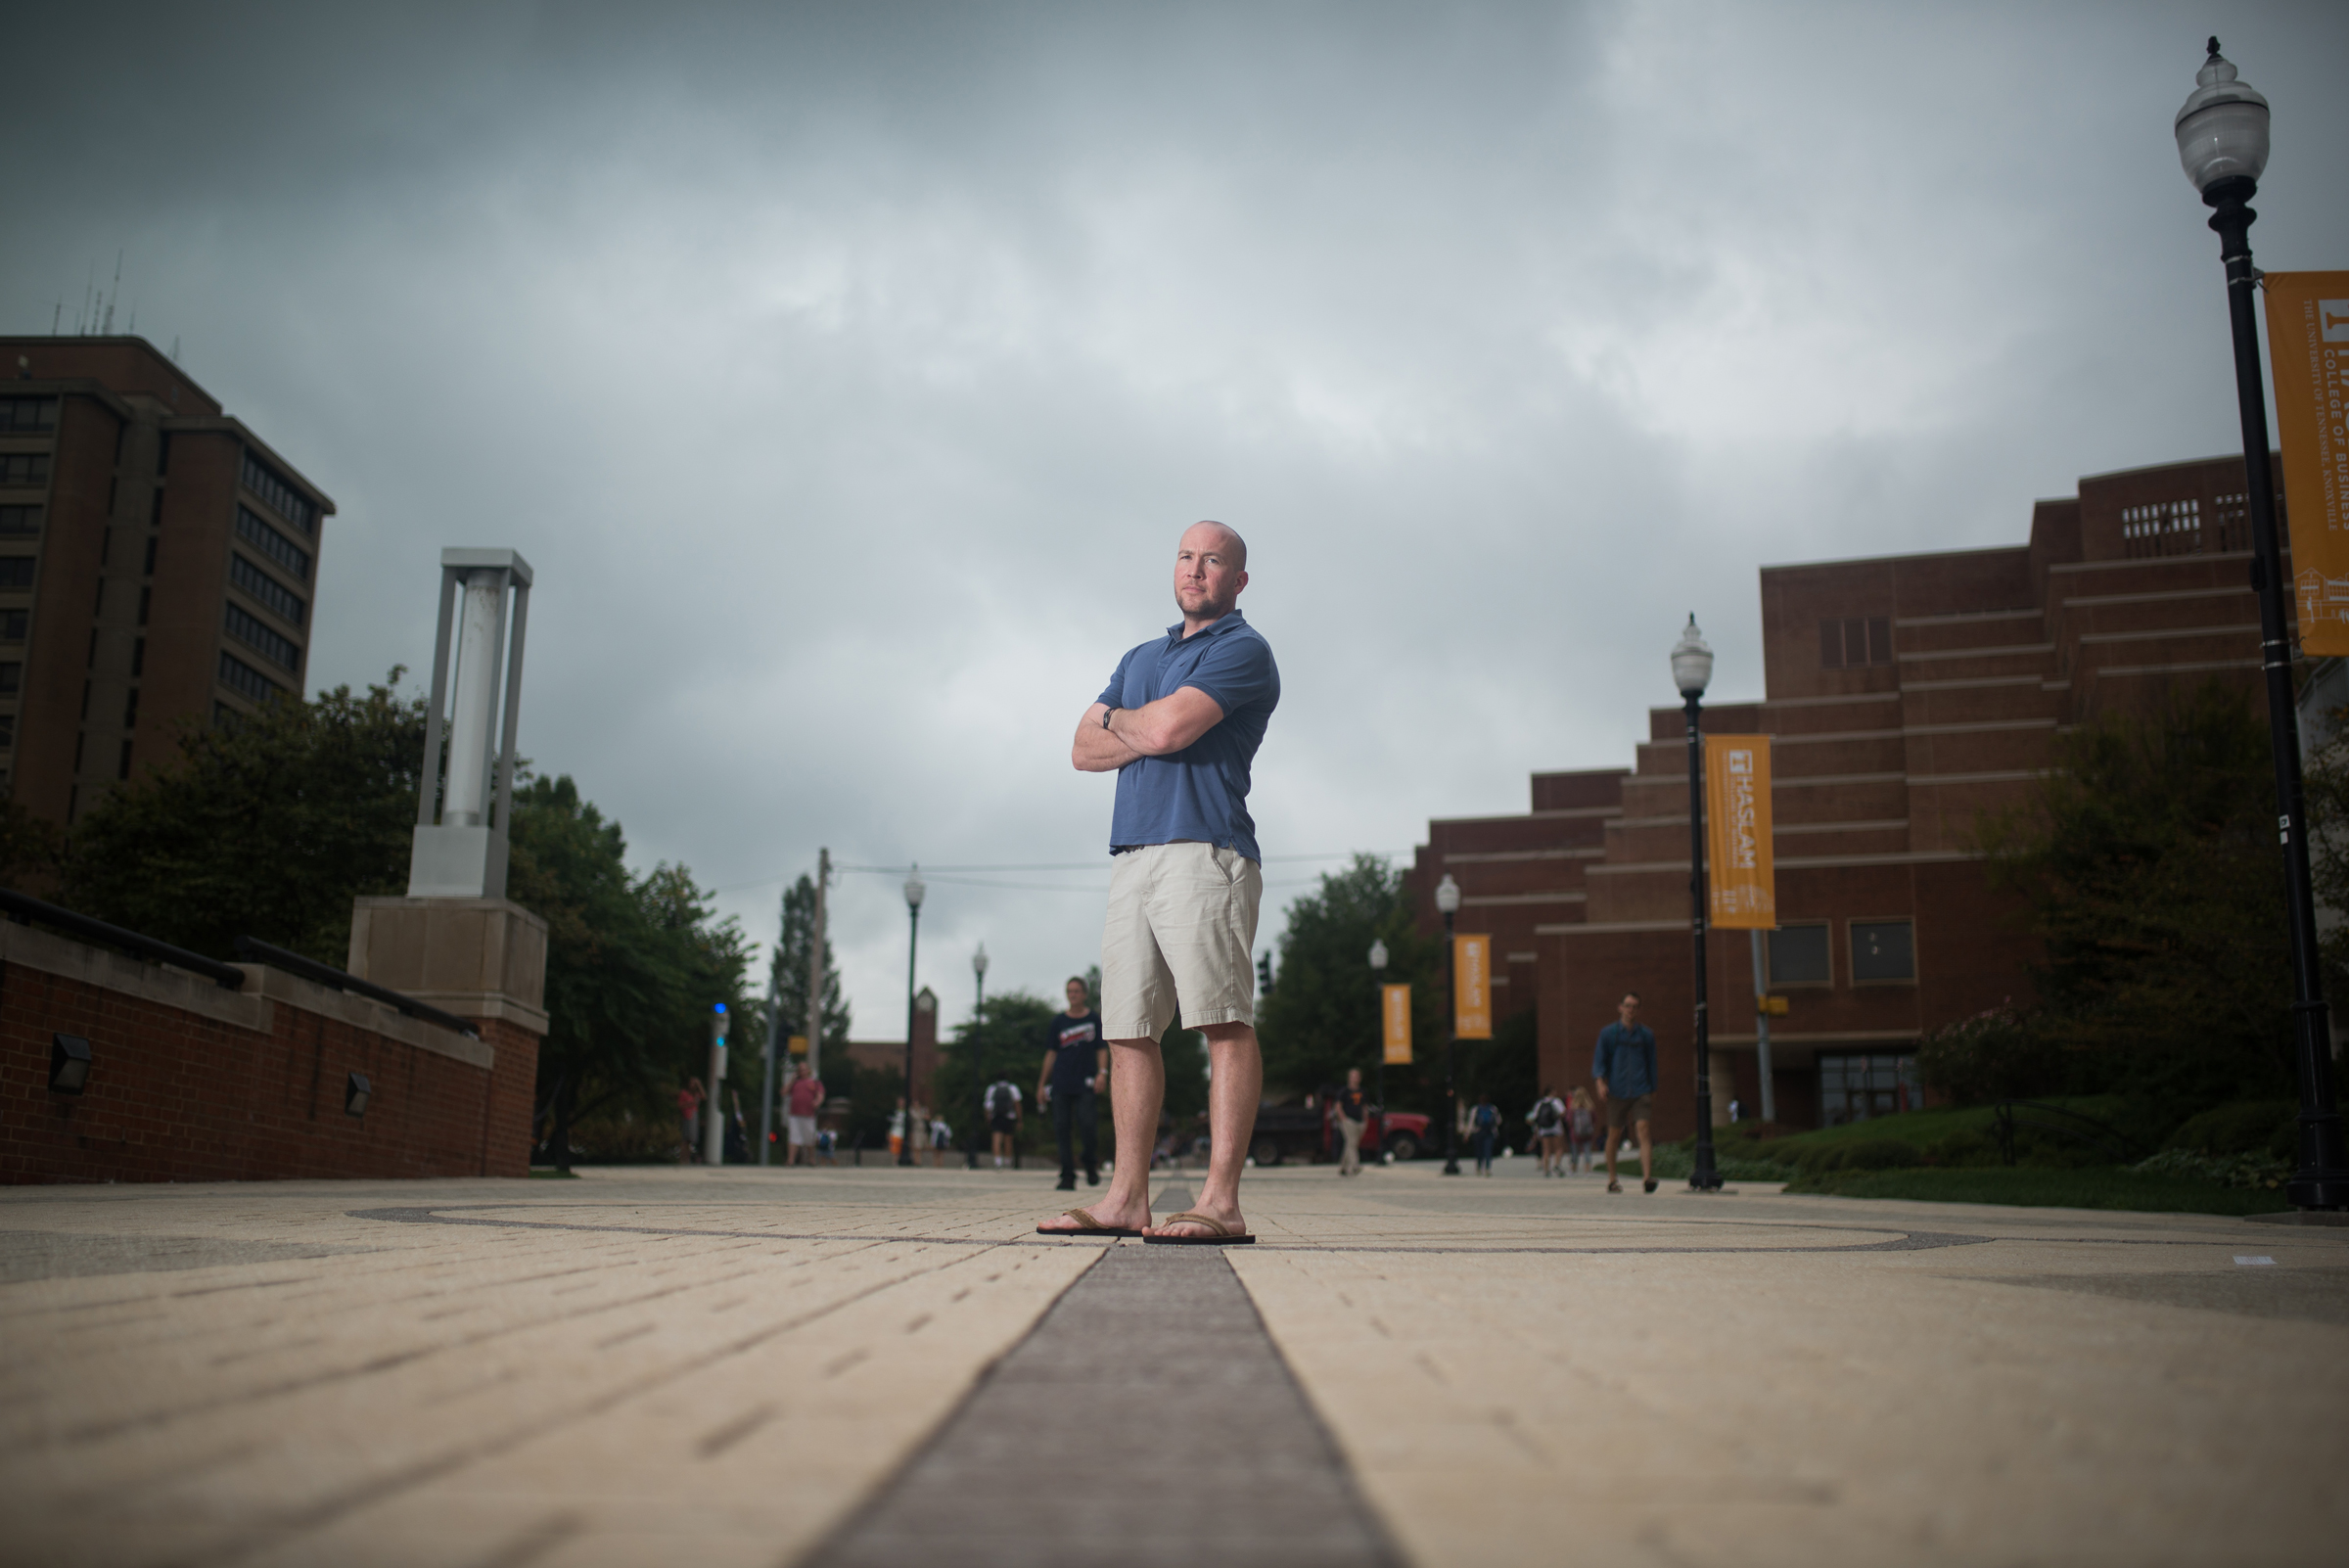 Jordan Harris stands in the center of the pedestrian walkway in front of Hodges Library in Knoxville